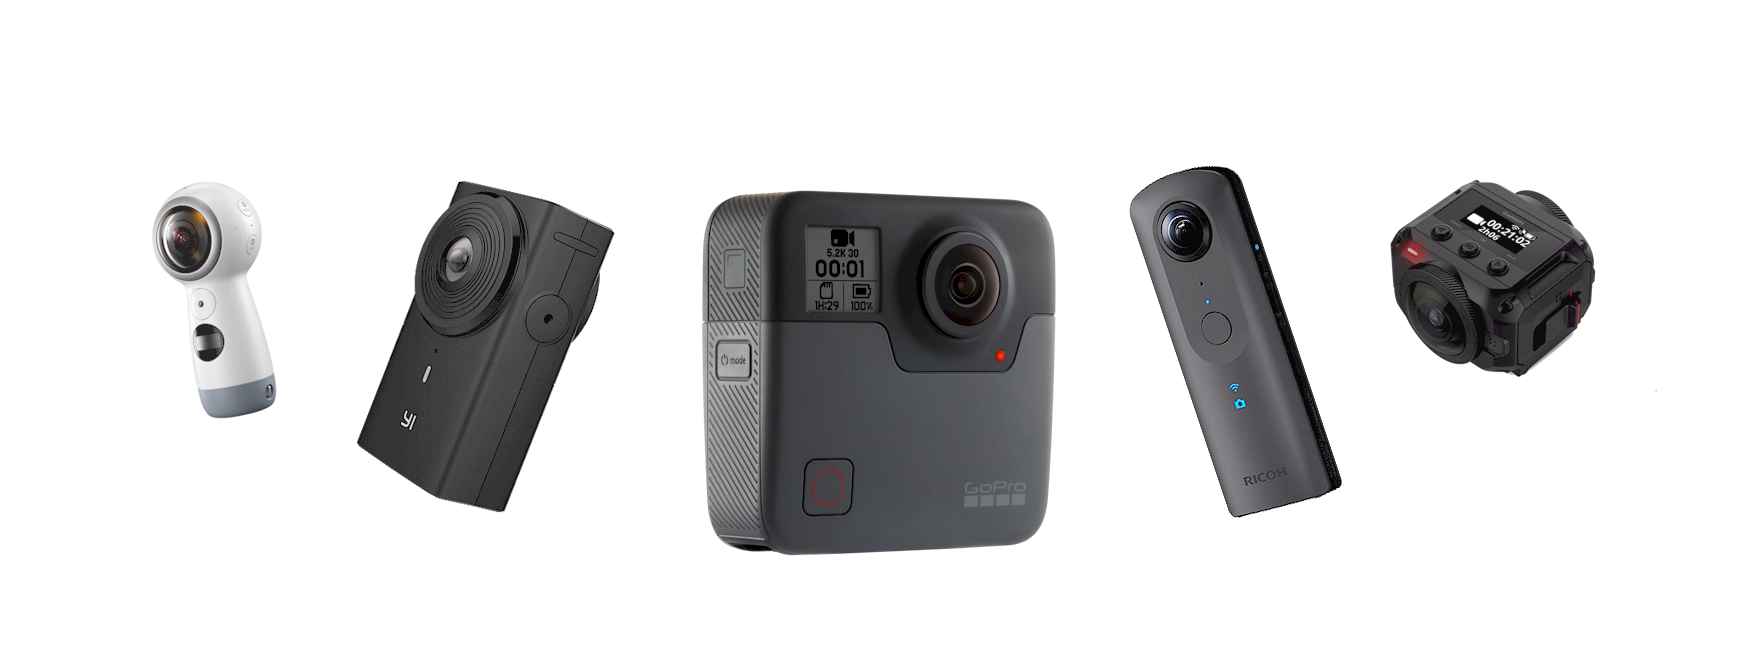 360 Video Cameras supported